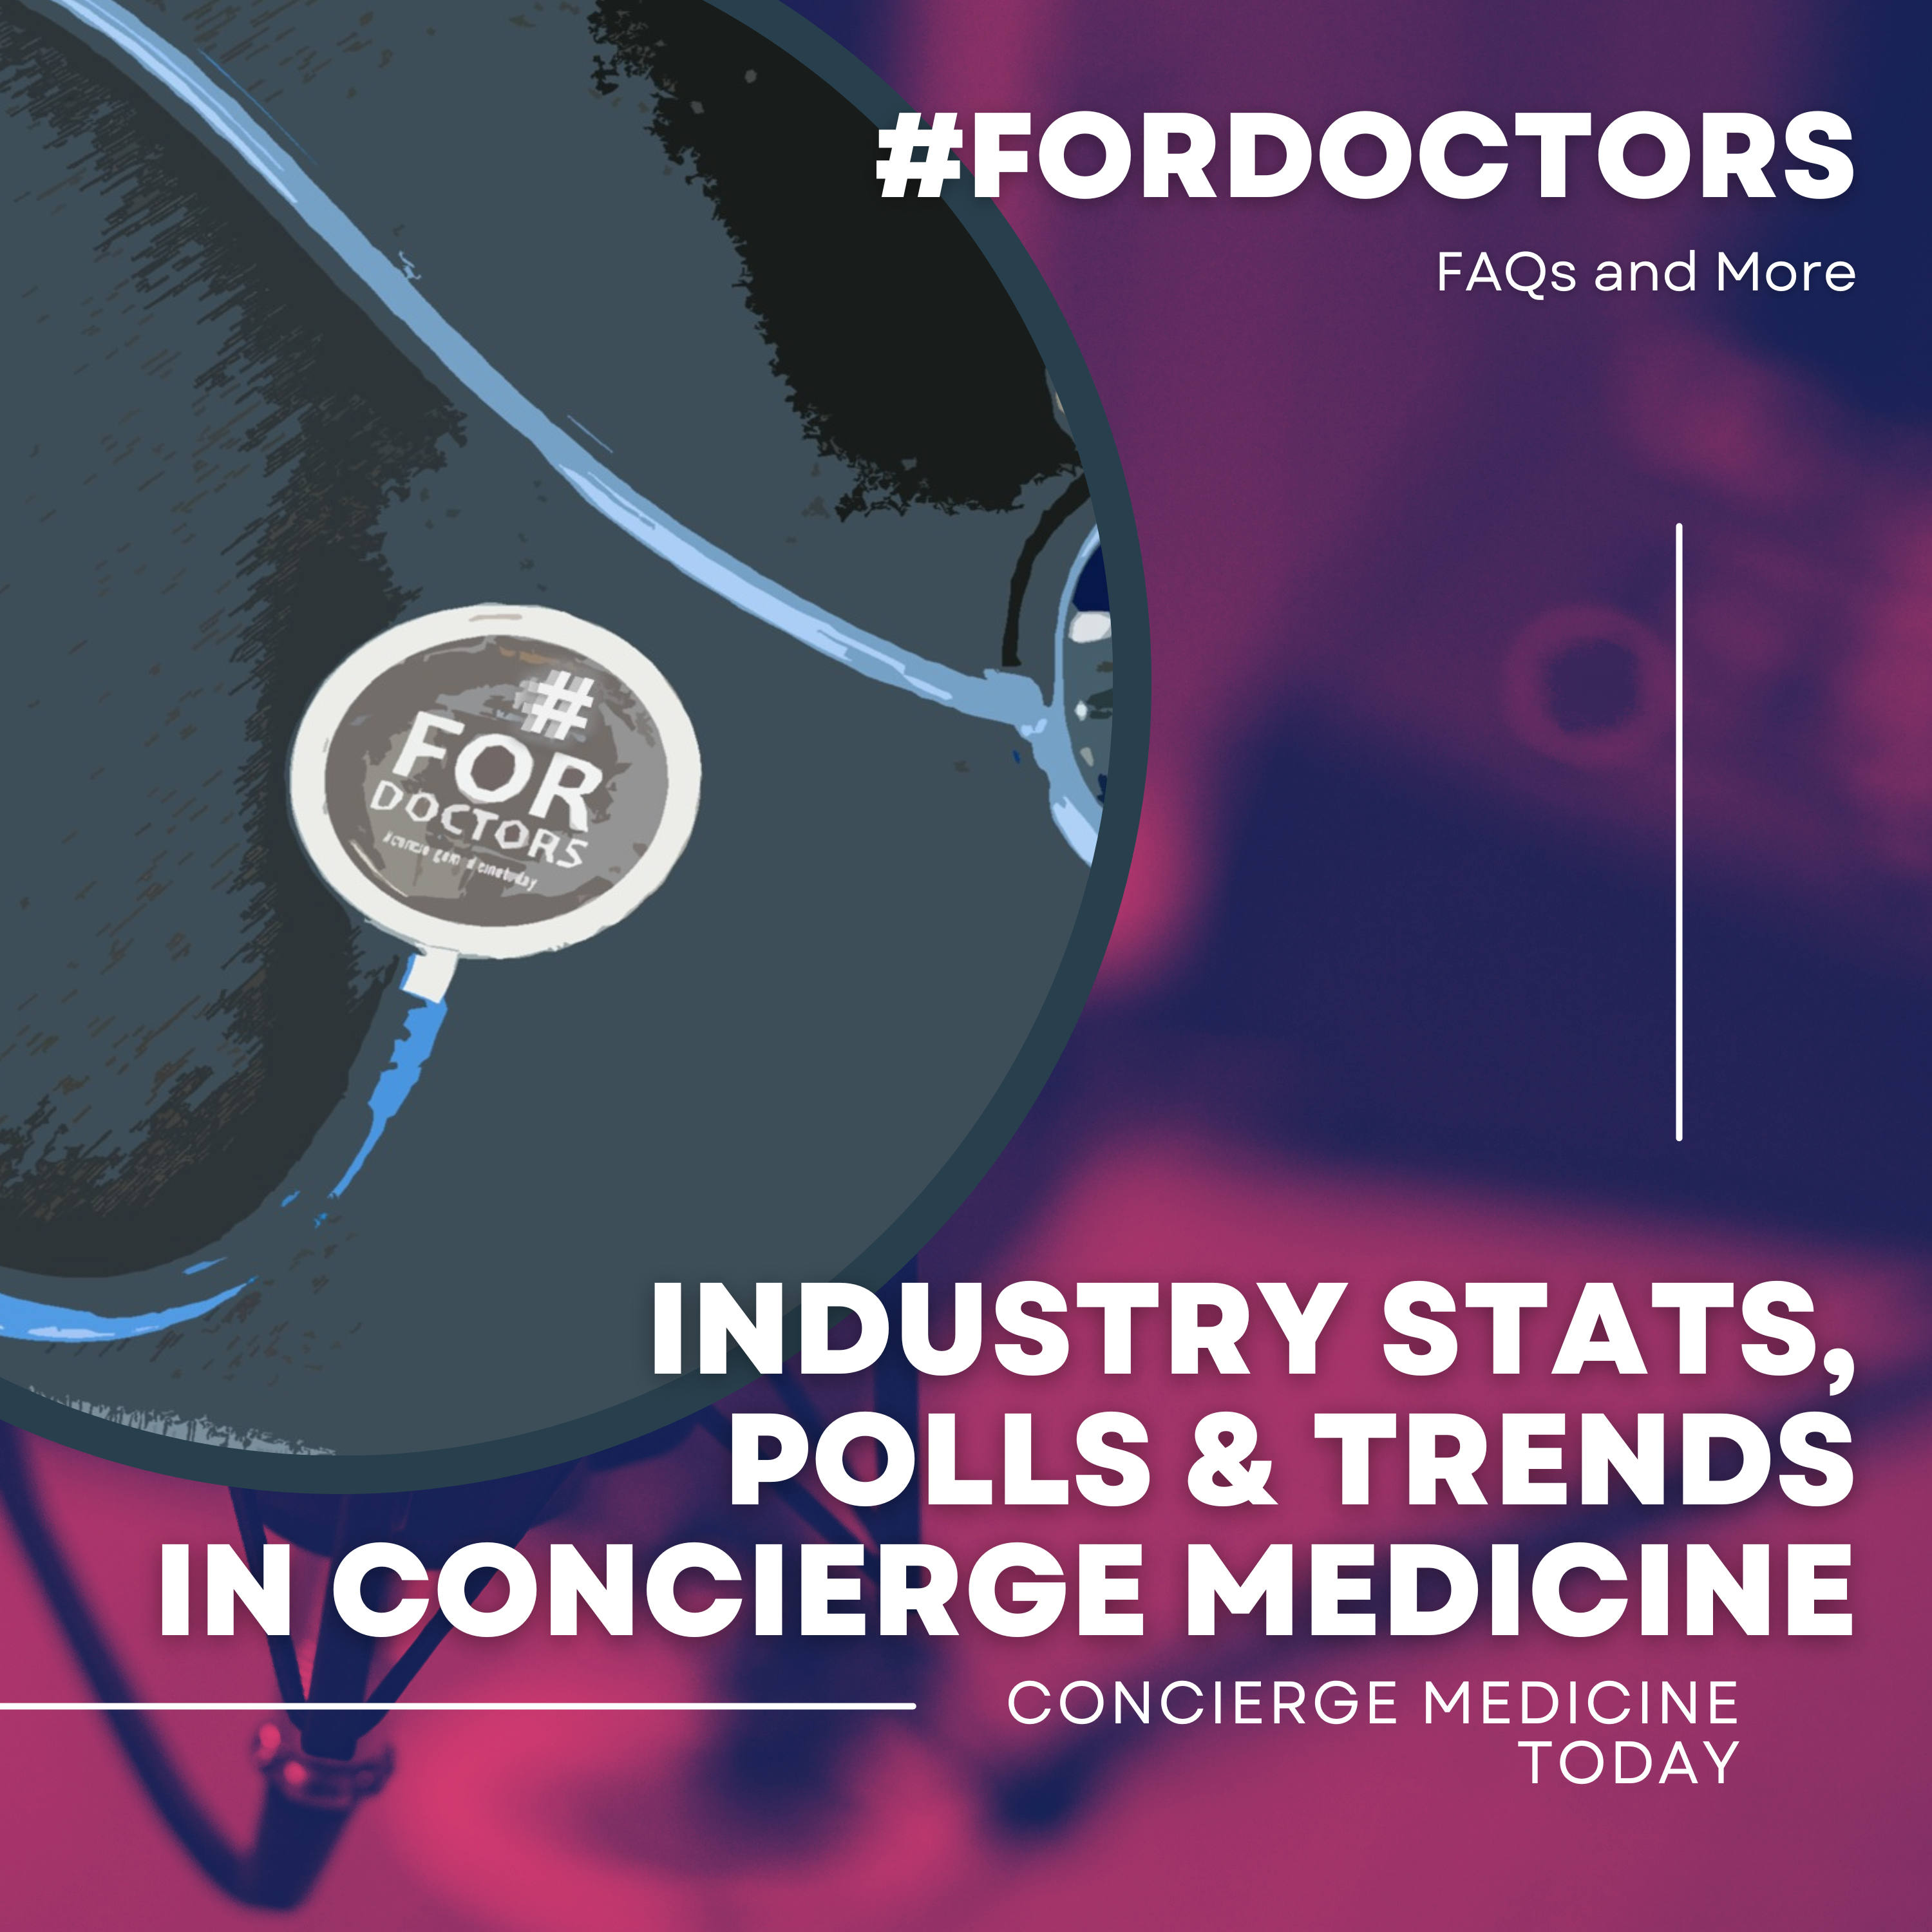 POLL | Annual Salary of a Concierge Doctor? (2021-2022) All Responses Are ‘Anonymous’